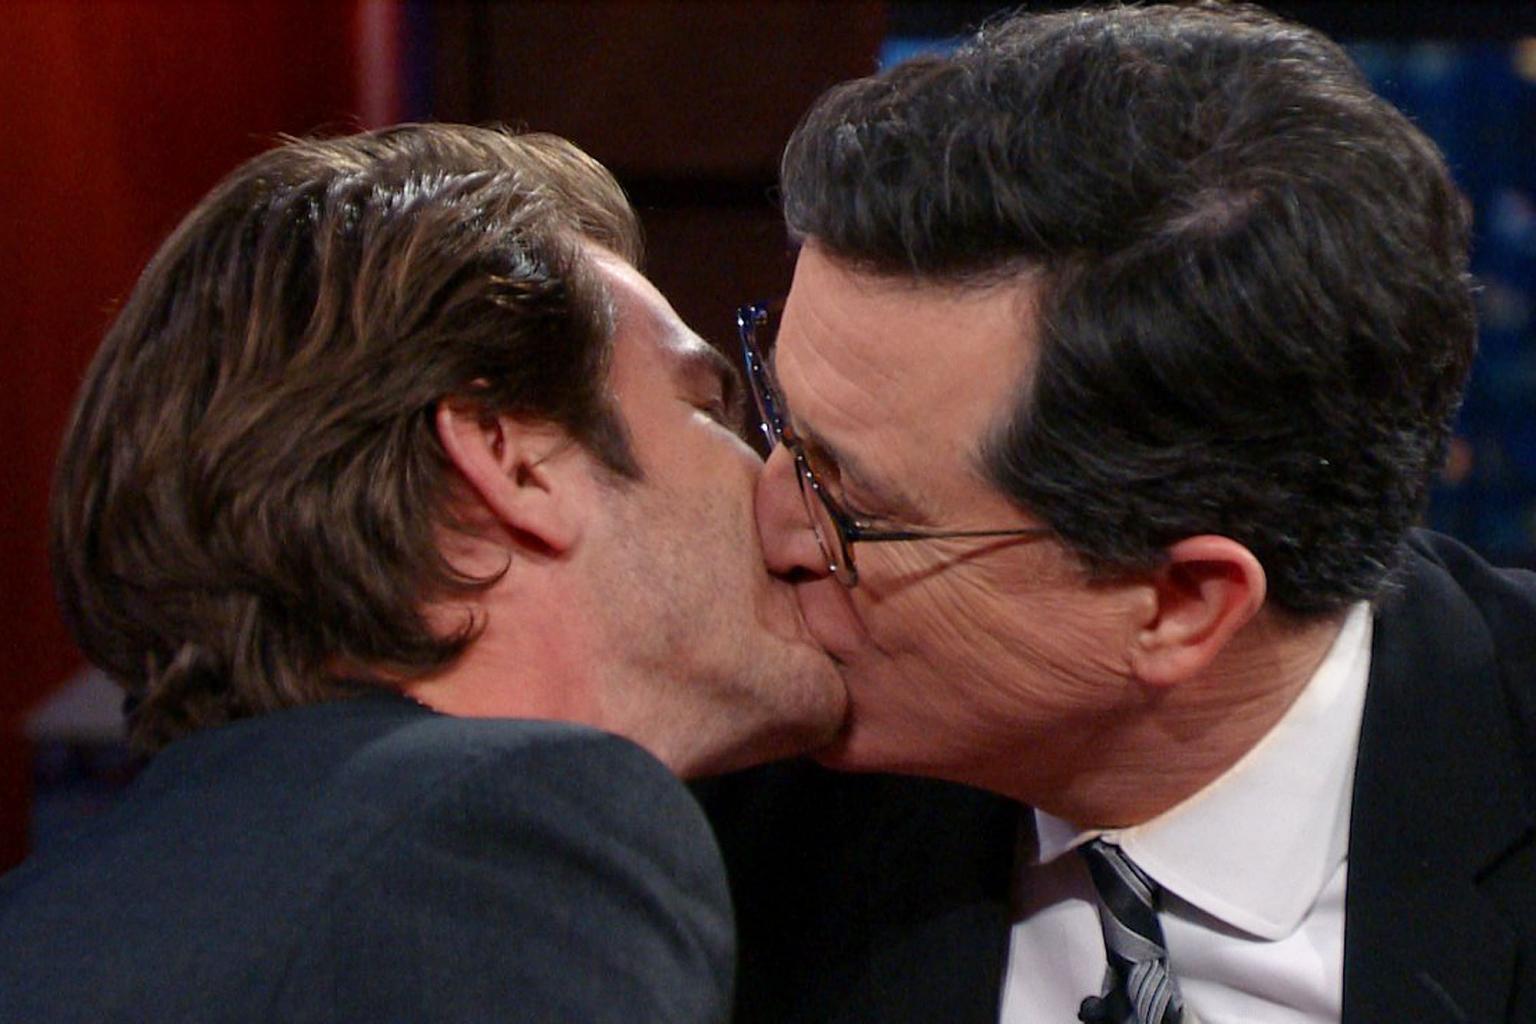 Andrew Garfield Opens Up About Ryan Reynolds Kiss â€¦ and Kisses Stephen Colbert!